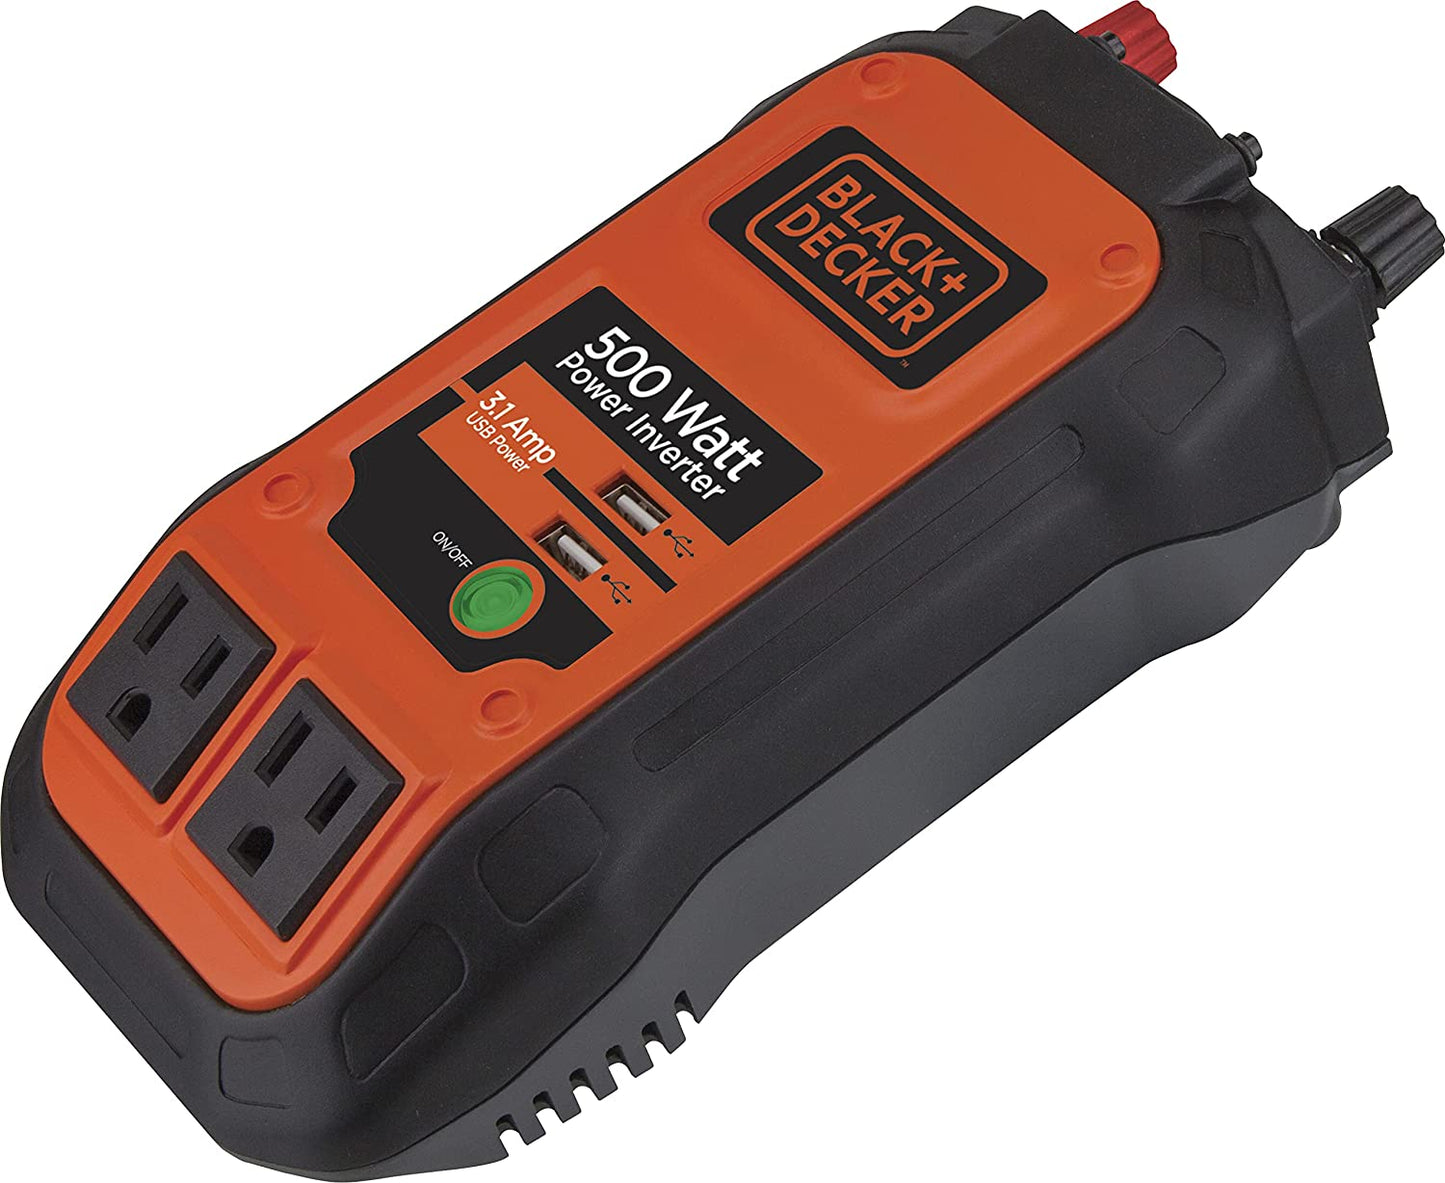 Power Inverter: Dual 120V AC Outlets, 3.1A USB Ports, 12V DC Adapter- E.S.N Tools